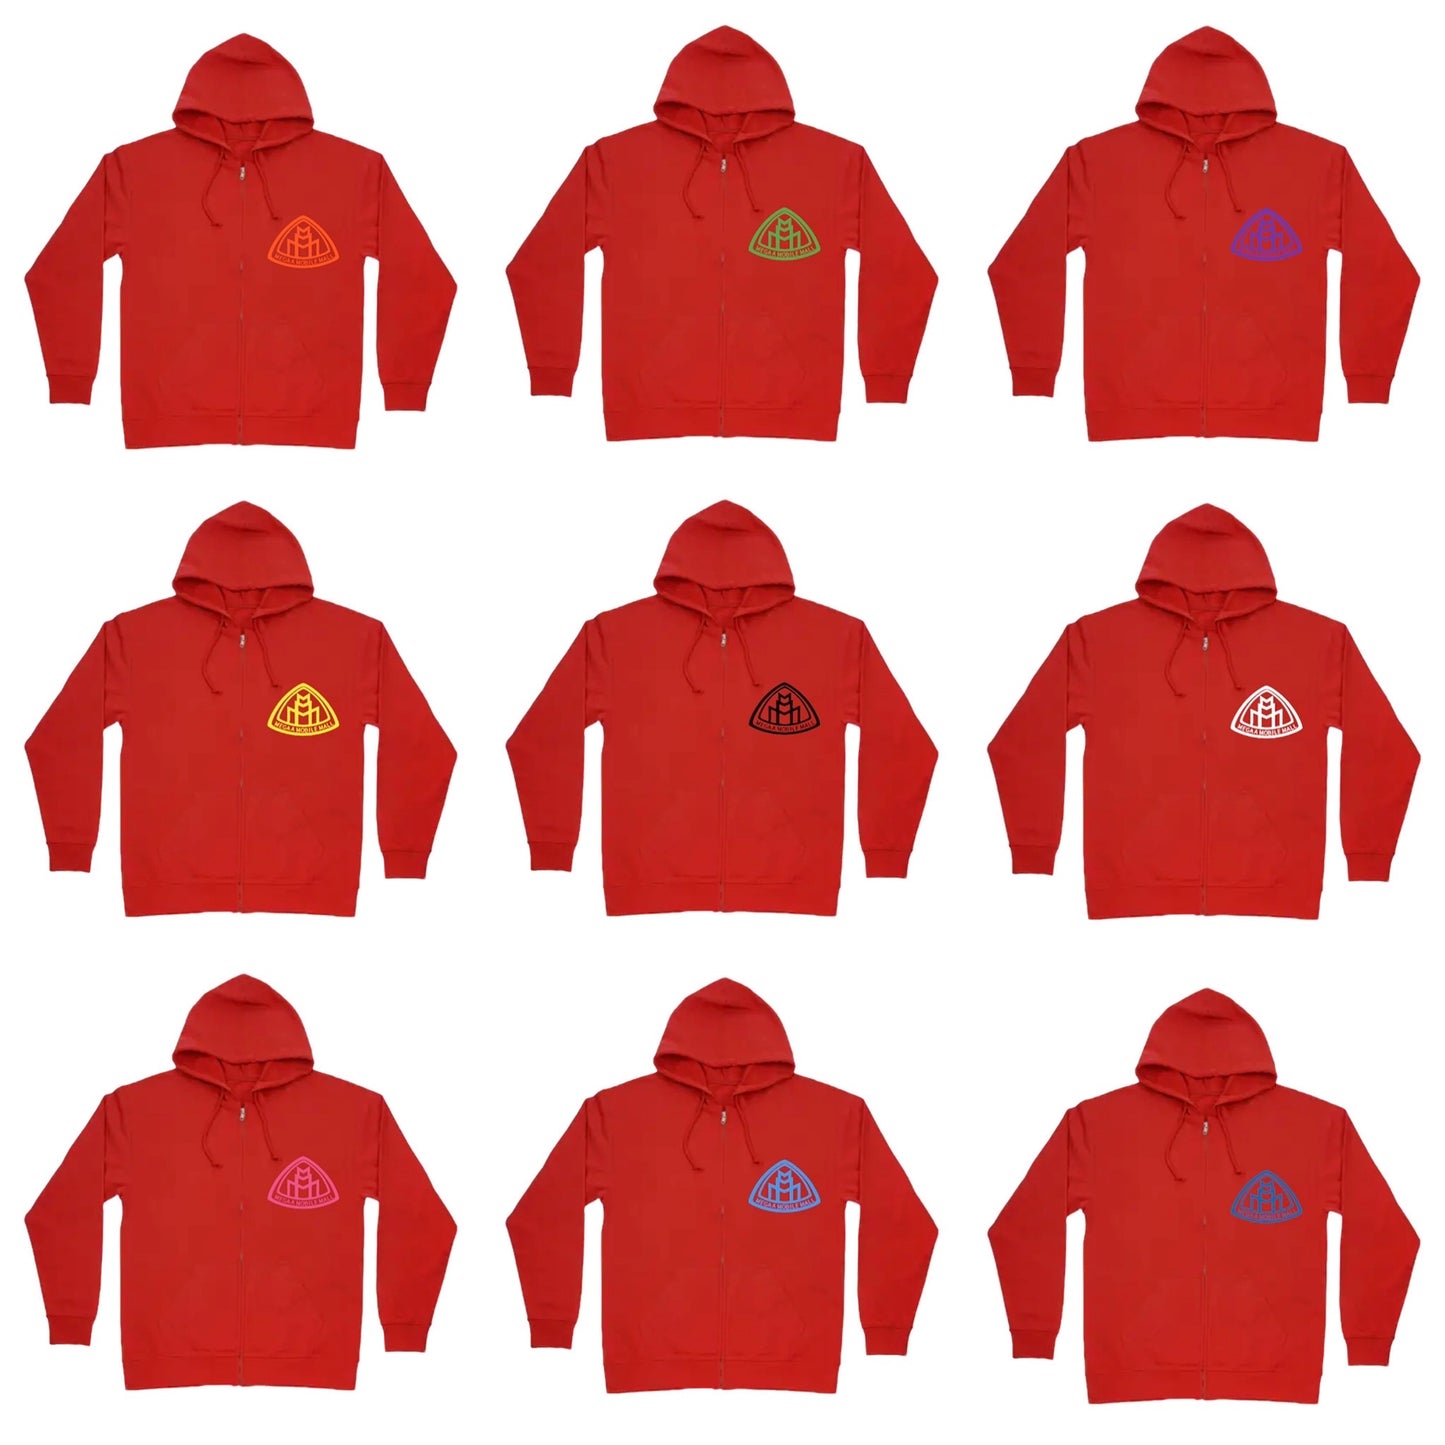 megaamobilemall red zip up hoodie in 9 different logo color options front side